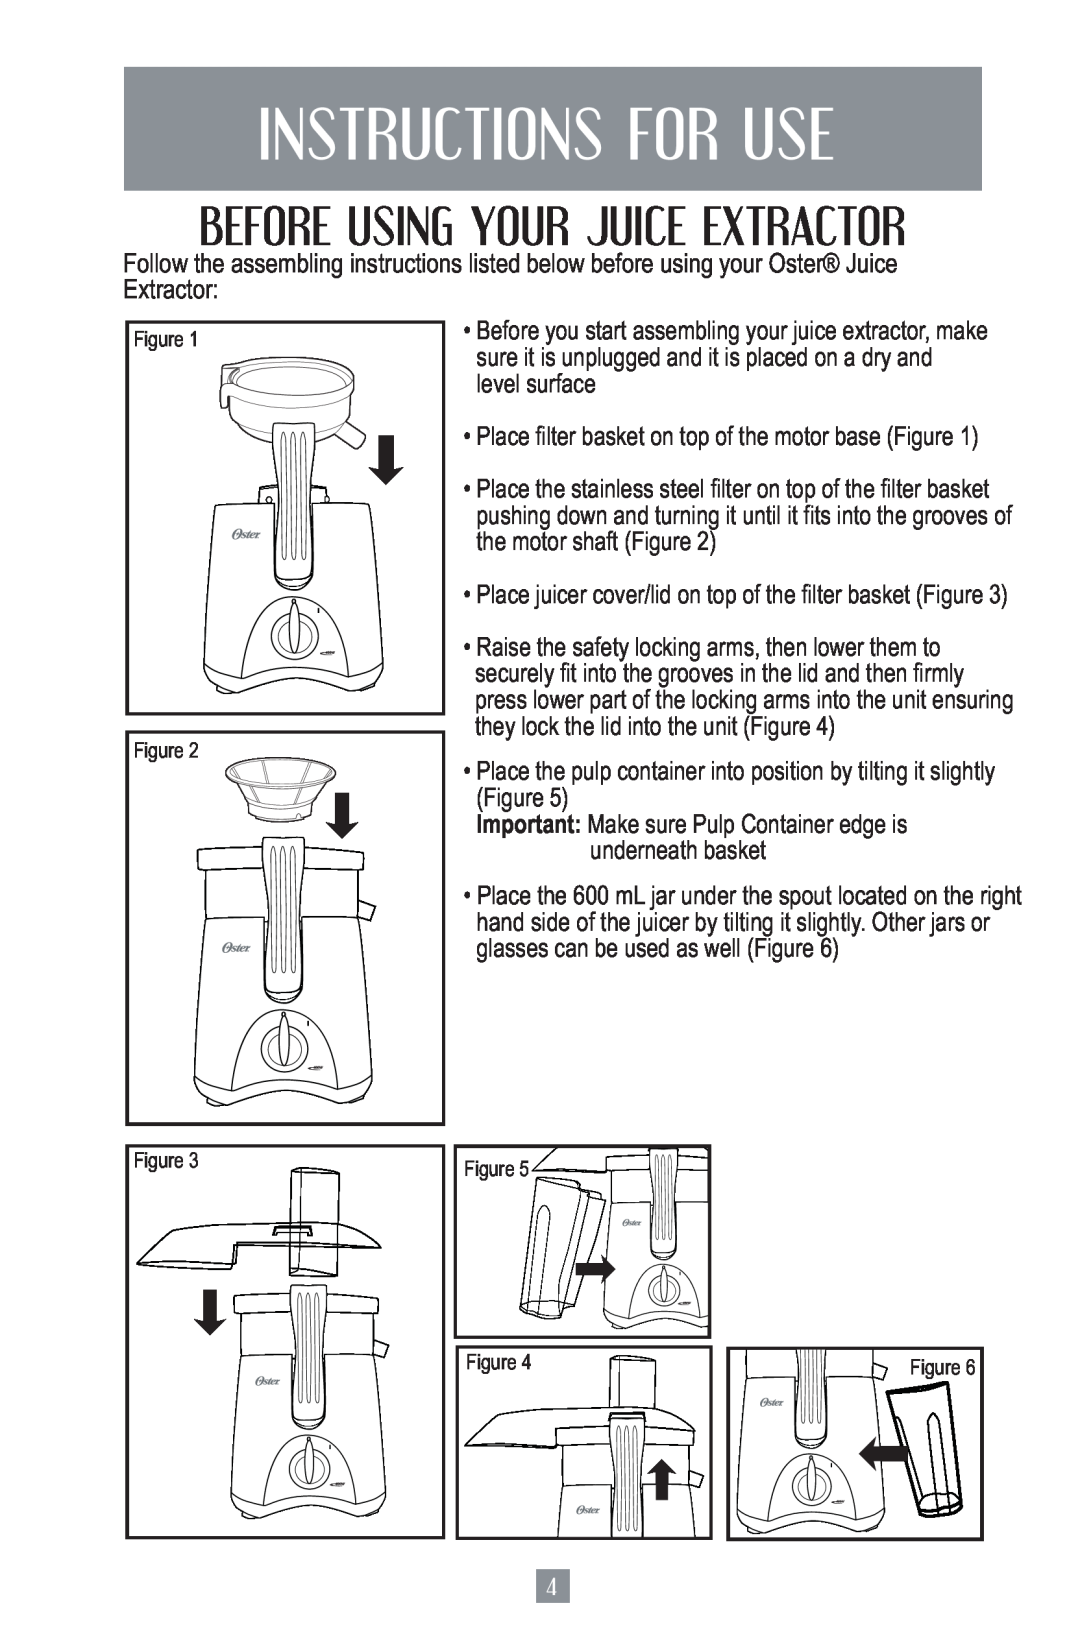 Oster 3157 instruction manual Instructions For Use, Before Using Your Juice Extractor 